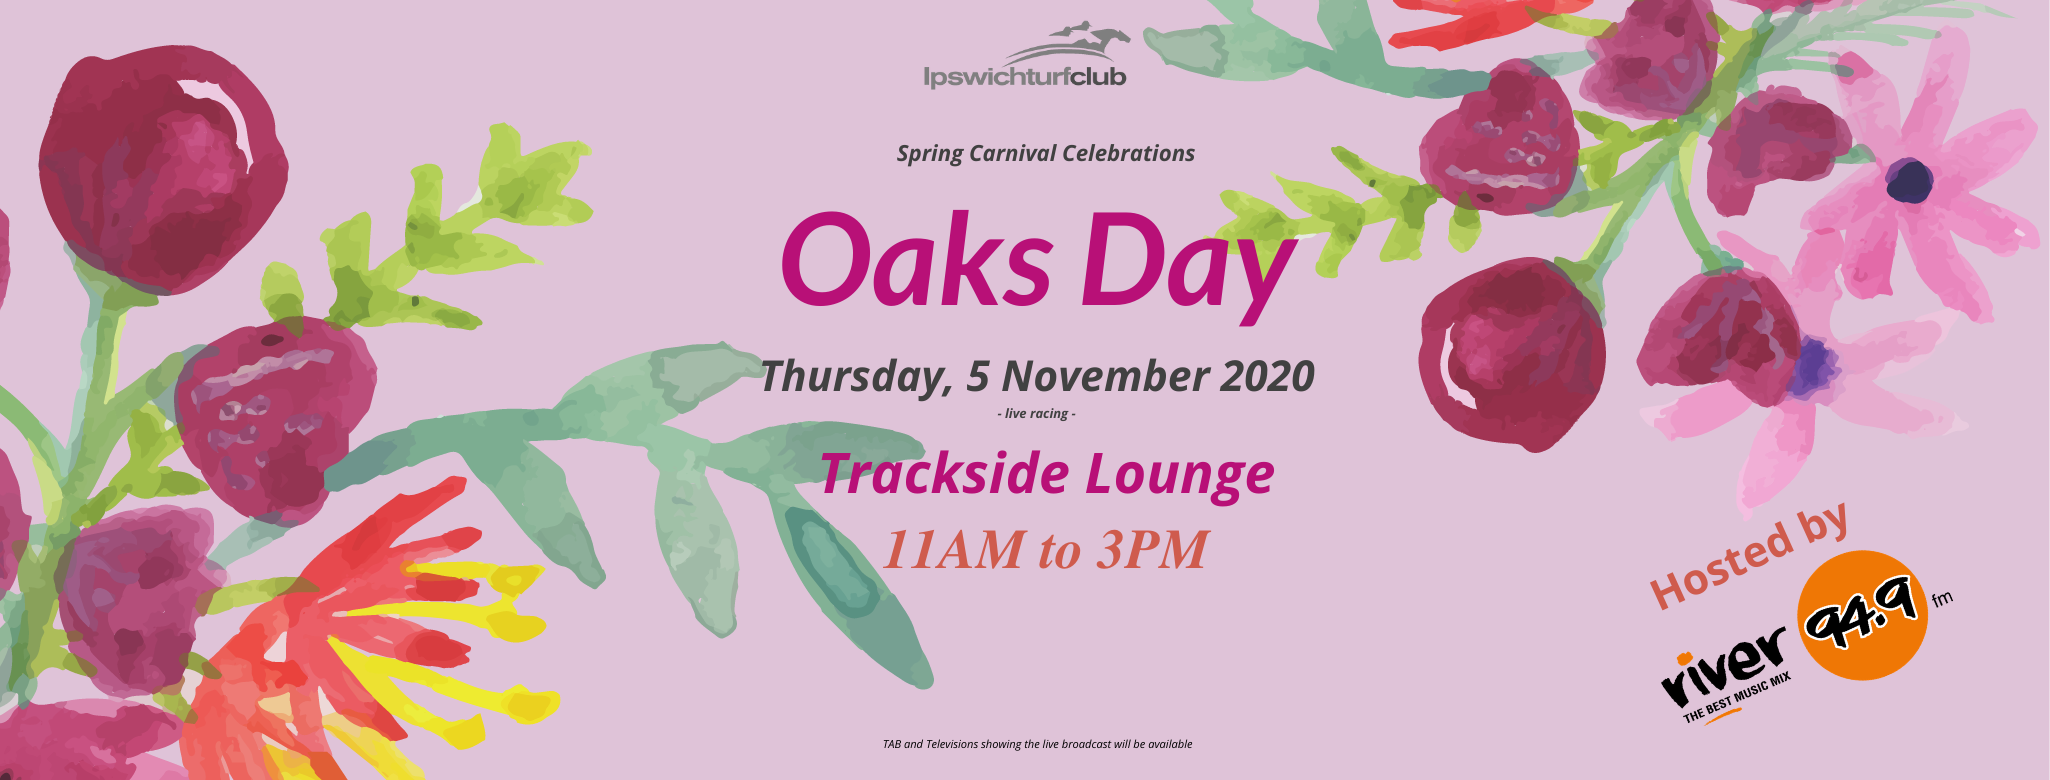 Oaks Day 2020 Packages